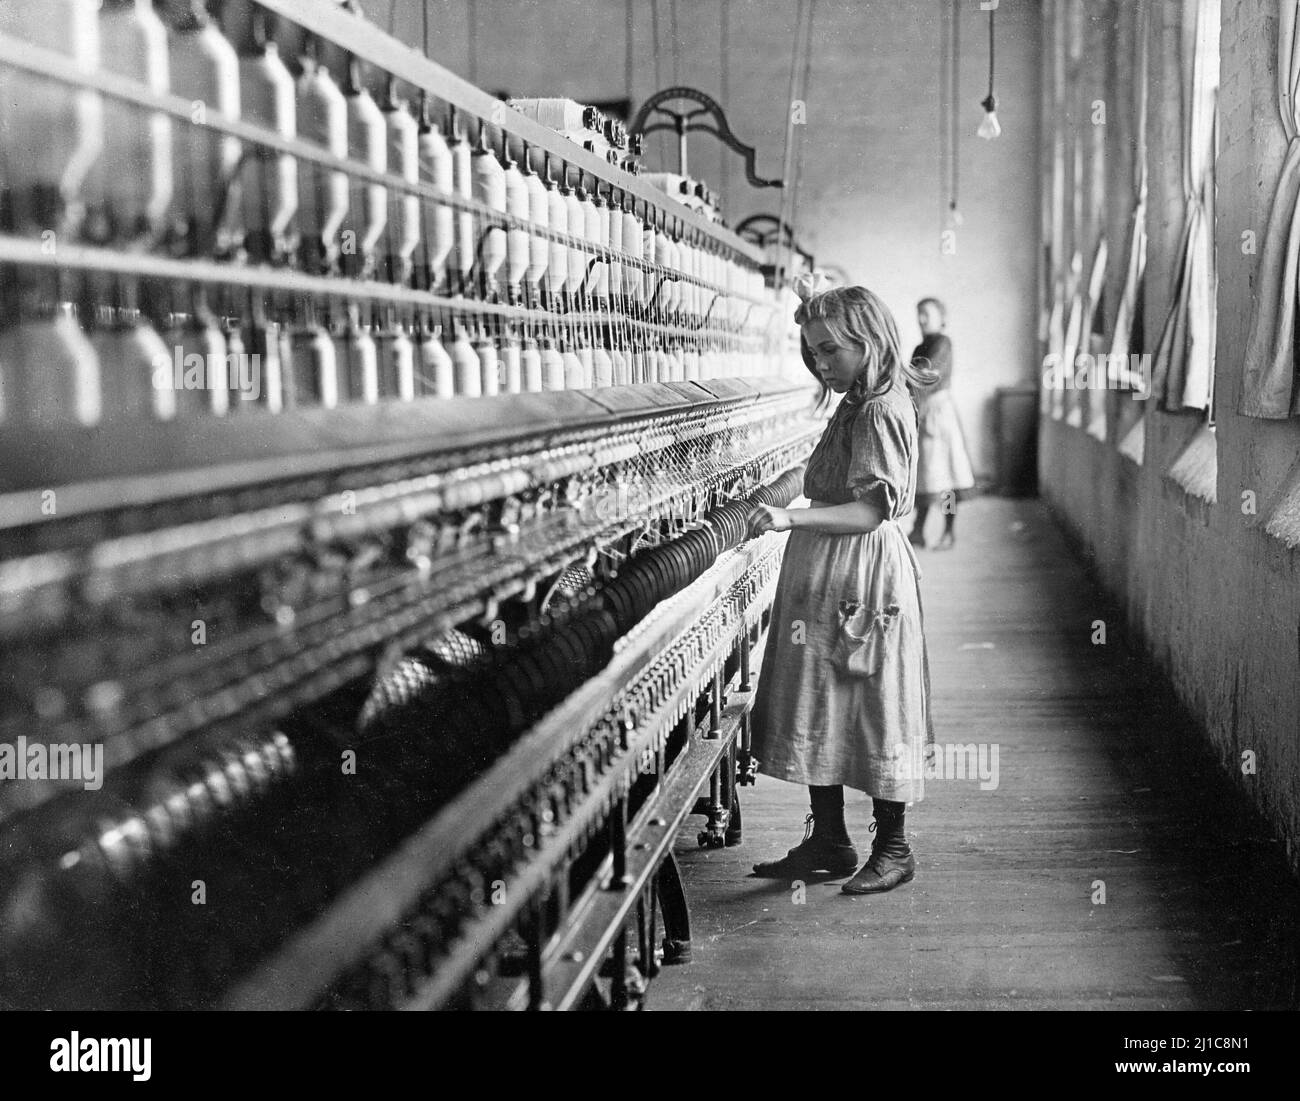 Sadie Pfeiffer, Spinner in Cotton Mill, North Carolina by Lewis Hine (1874-1940), 1908. The photograph shows a young girl working in a cotton mill as child labor Stock Photo